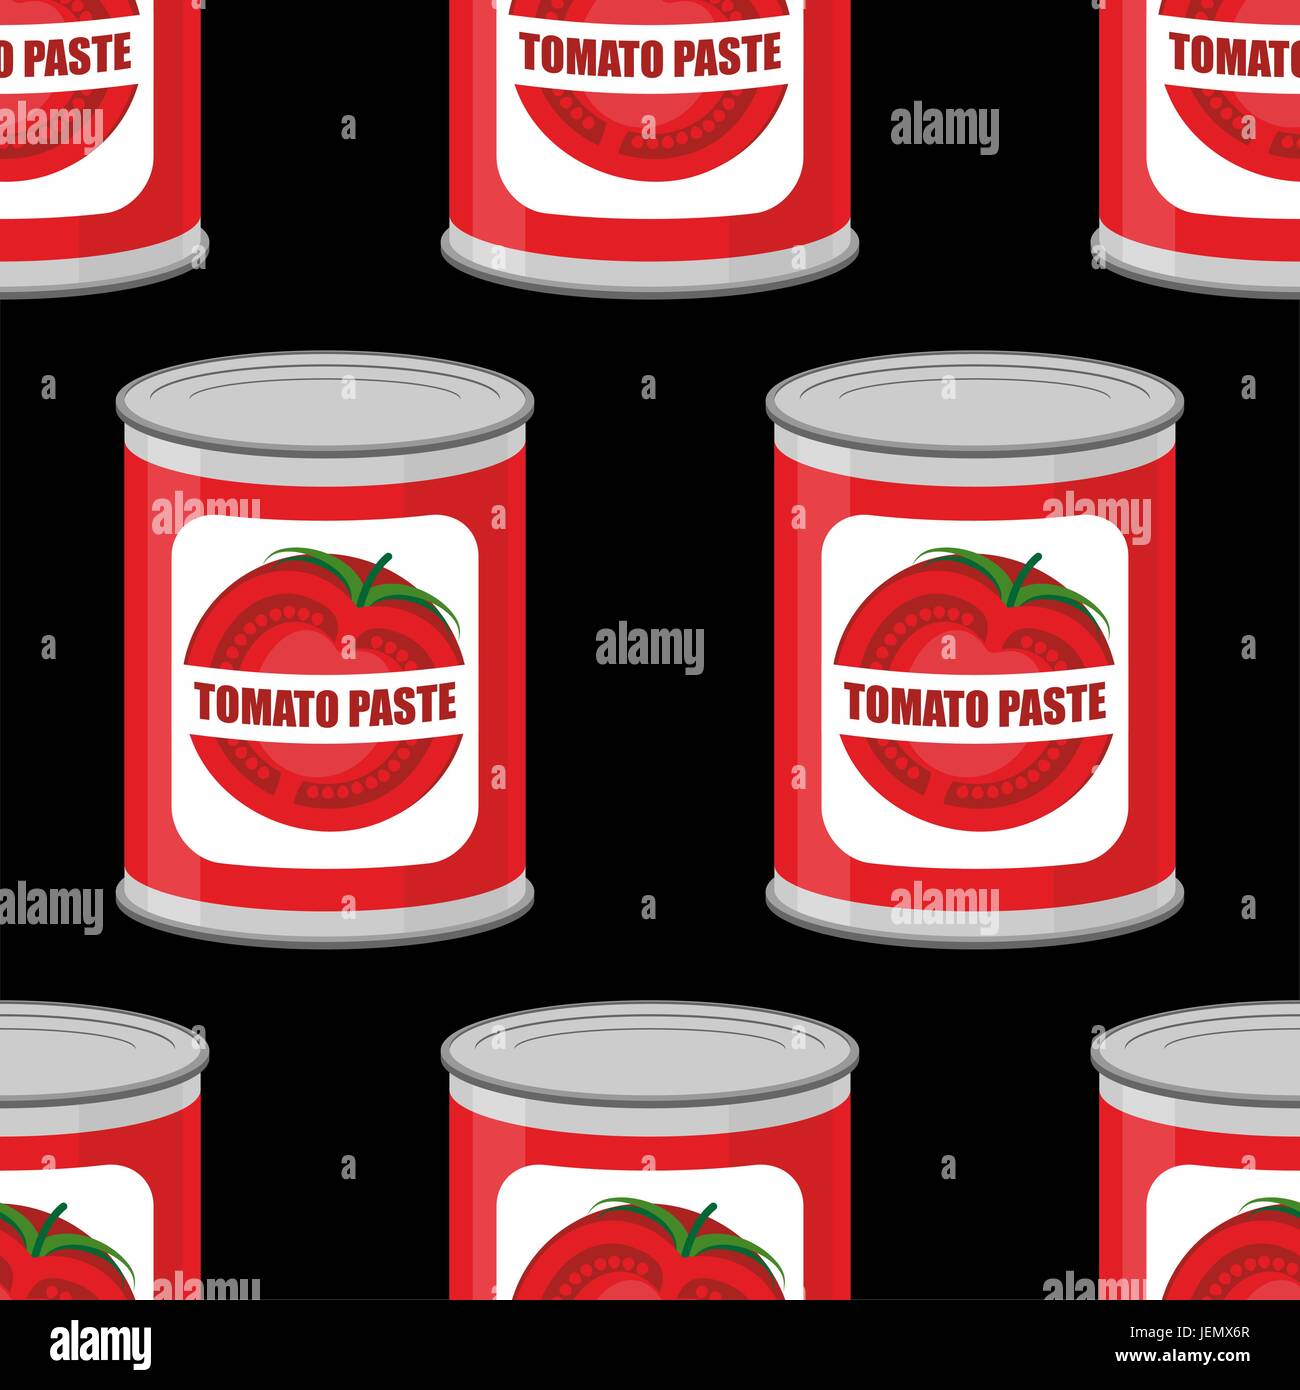 Tomato paste seamless pattern. Cans texture. Iron pot with tomatoes Stock Vector